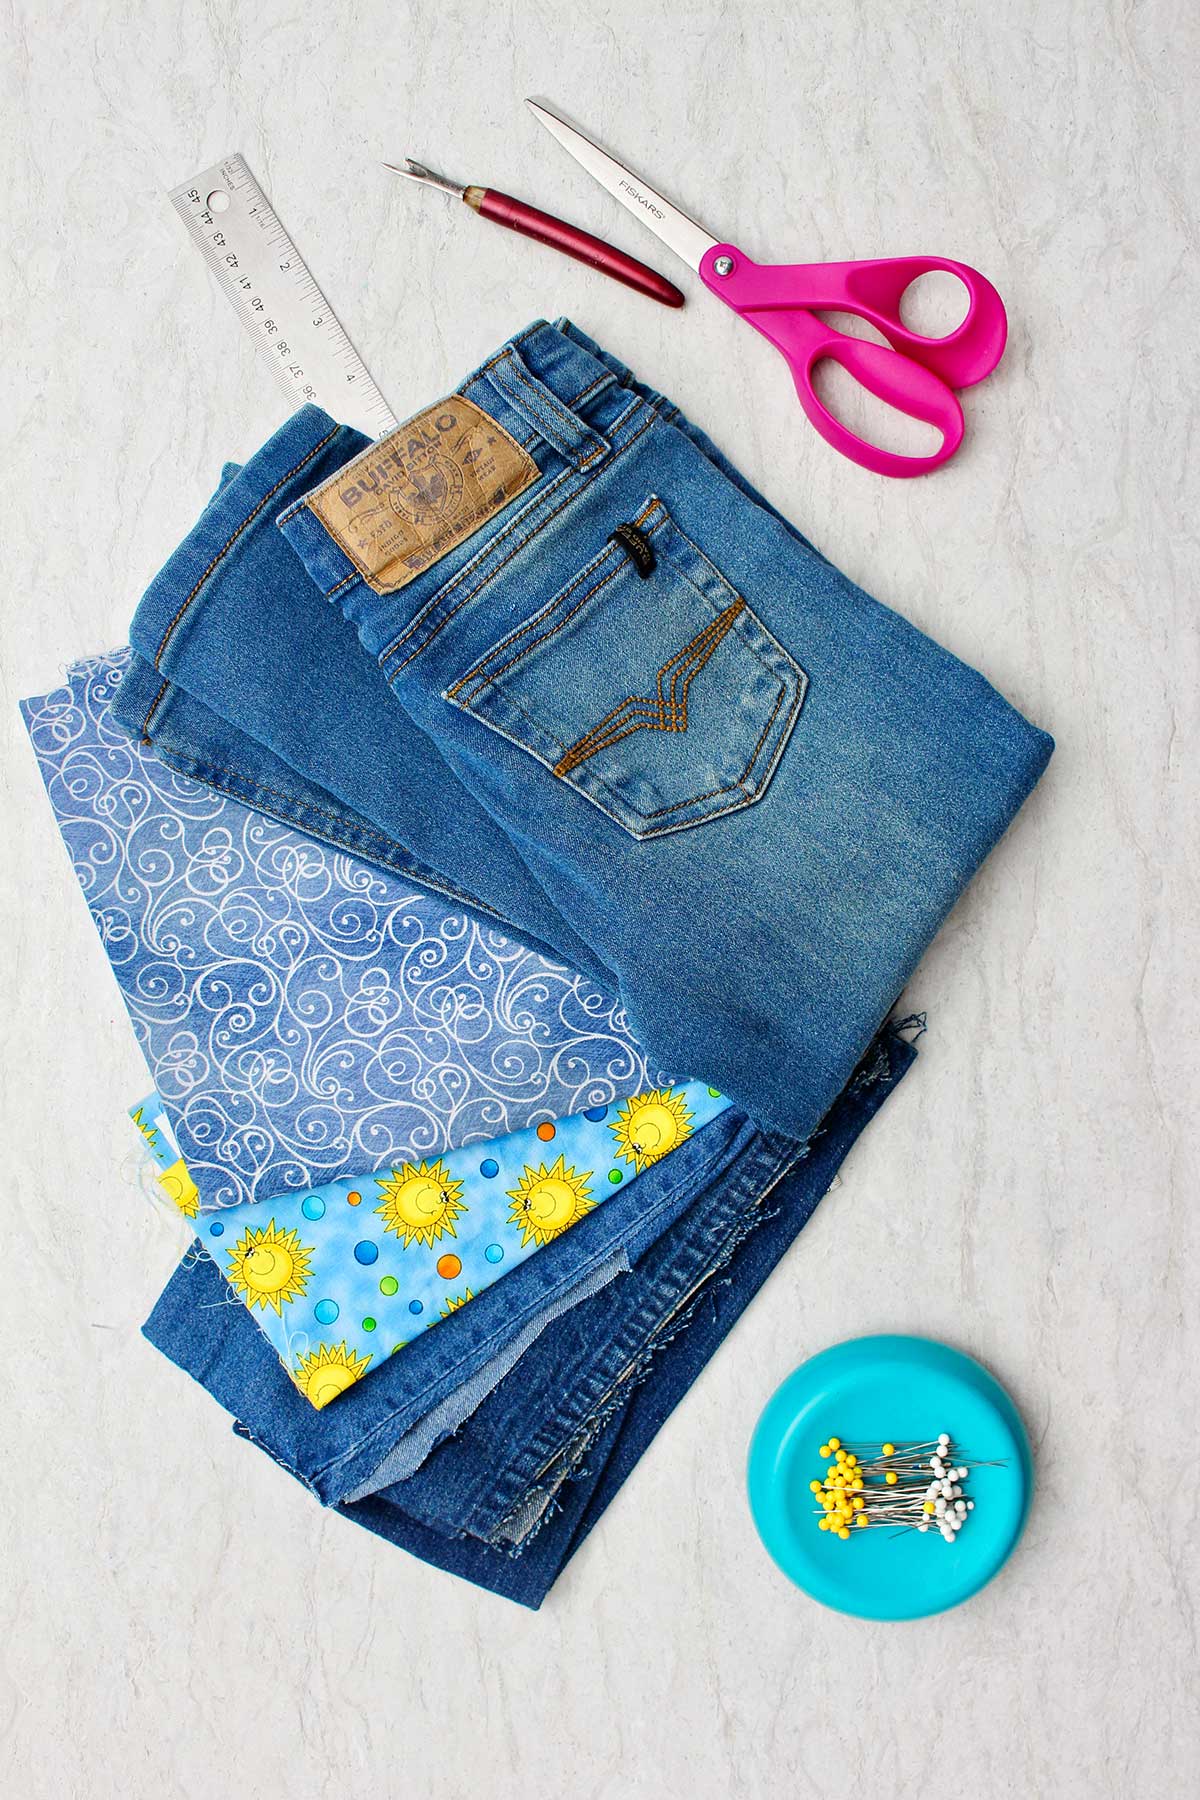 Supplies needed to make bell bottom jeans. A pair of jeans, scissors, decorative fabric, ruler and pins.